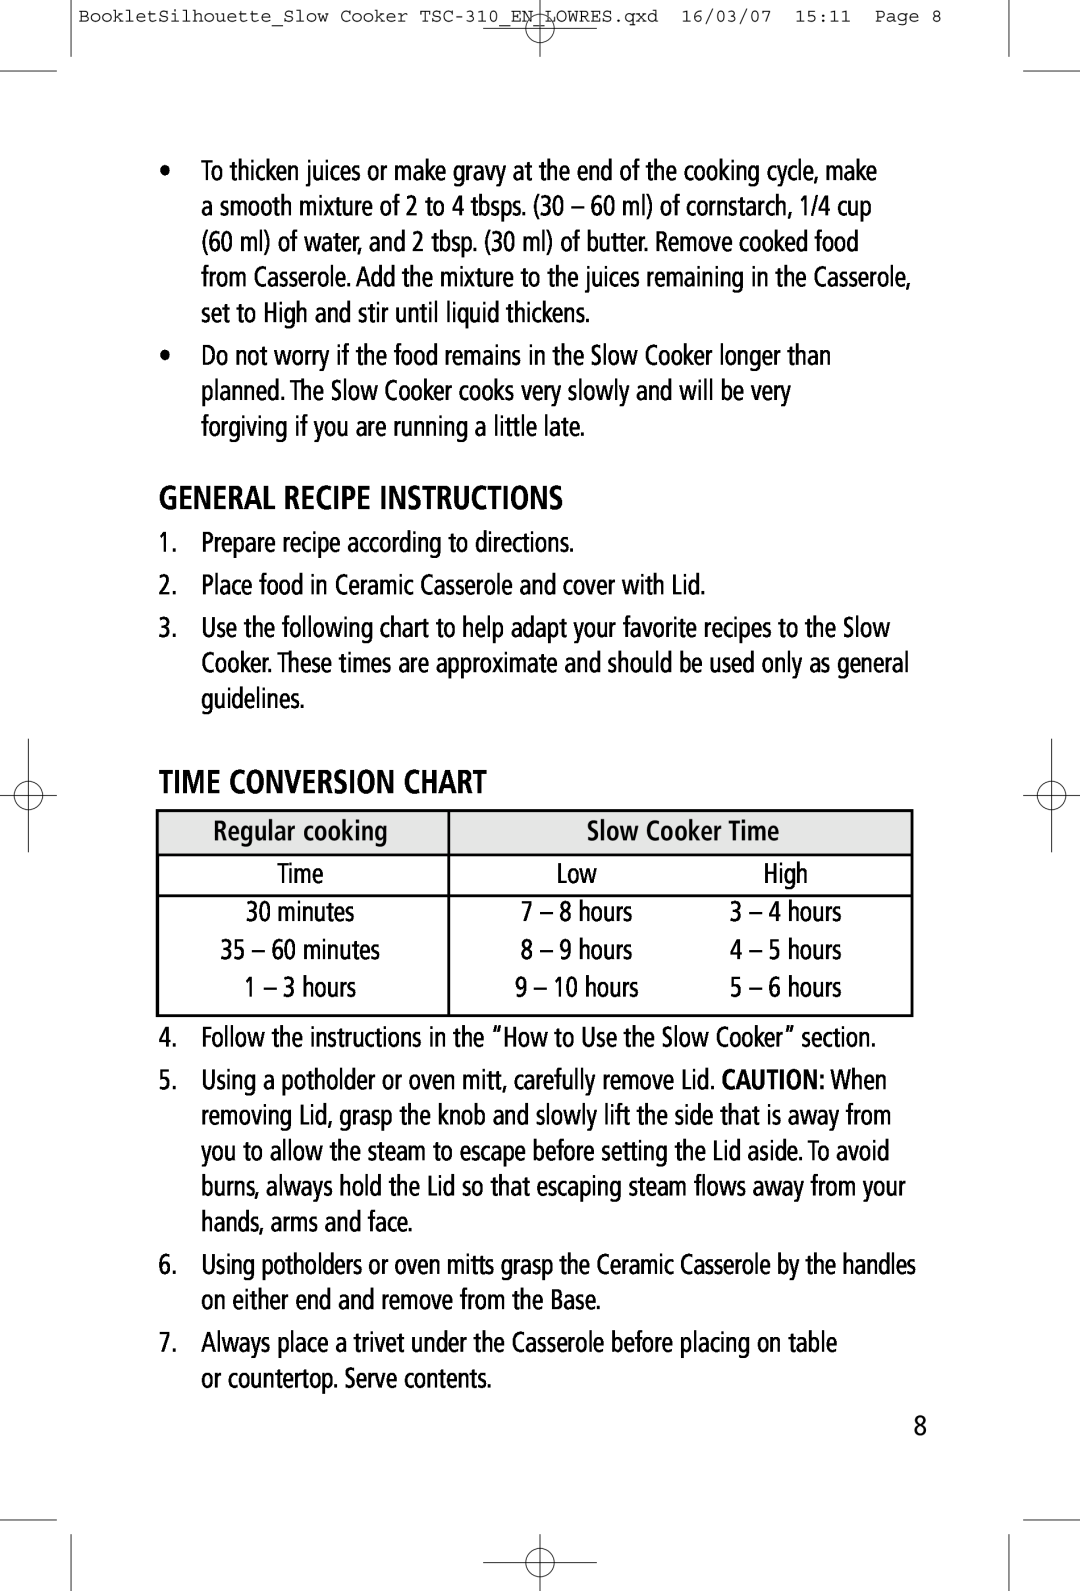 Toastess TSC-310 manual General Recipe Instructions, Time Conversion Chart, Regular cooking, Slow Cooker Time 